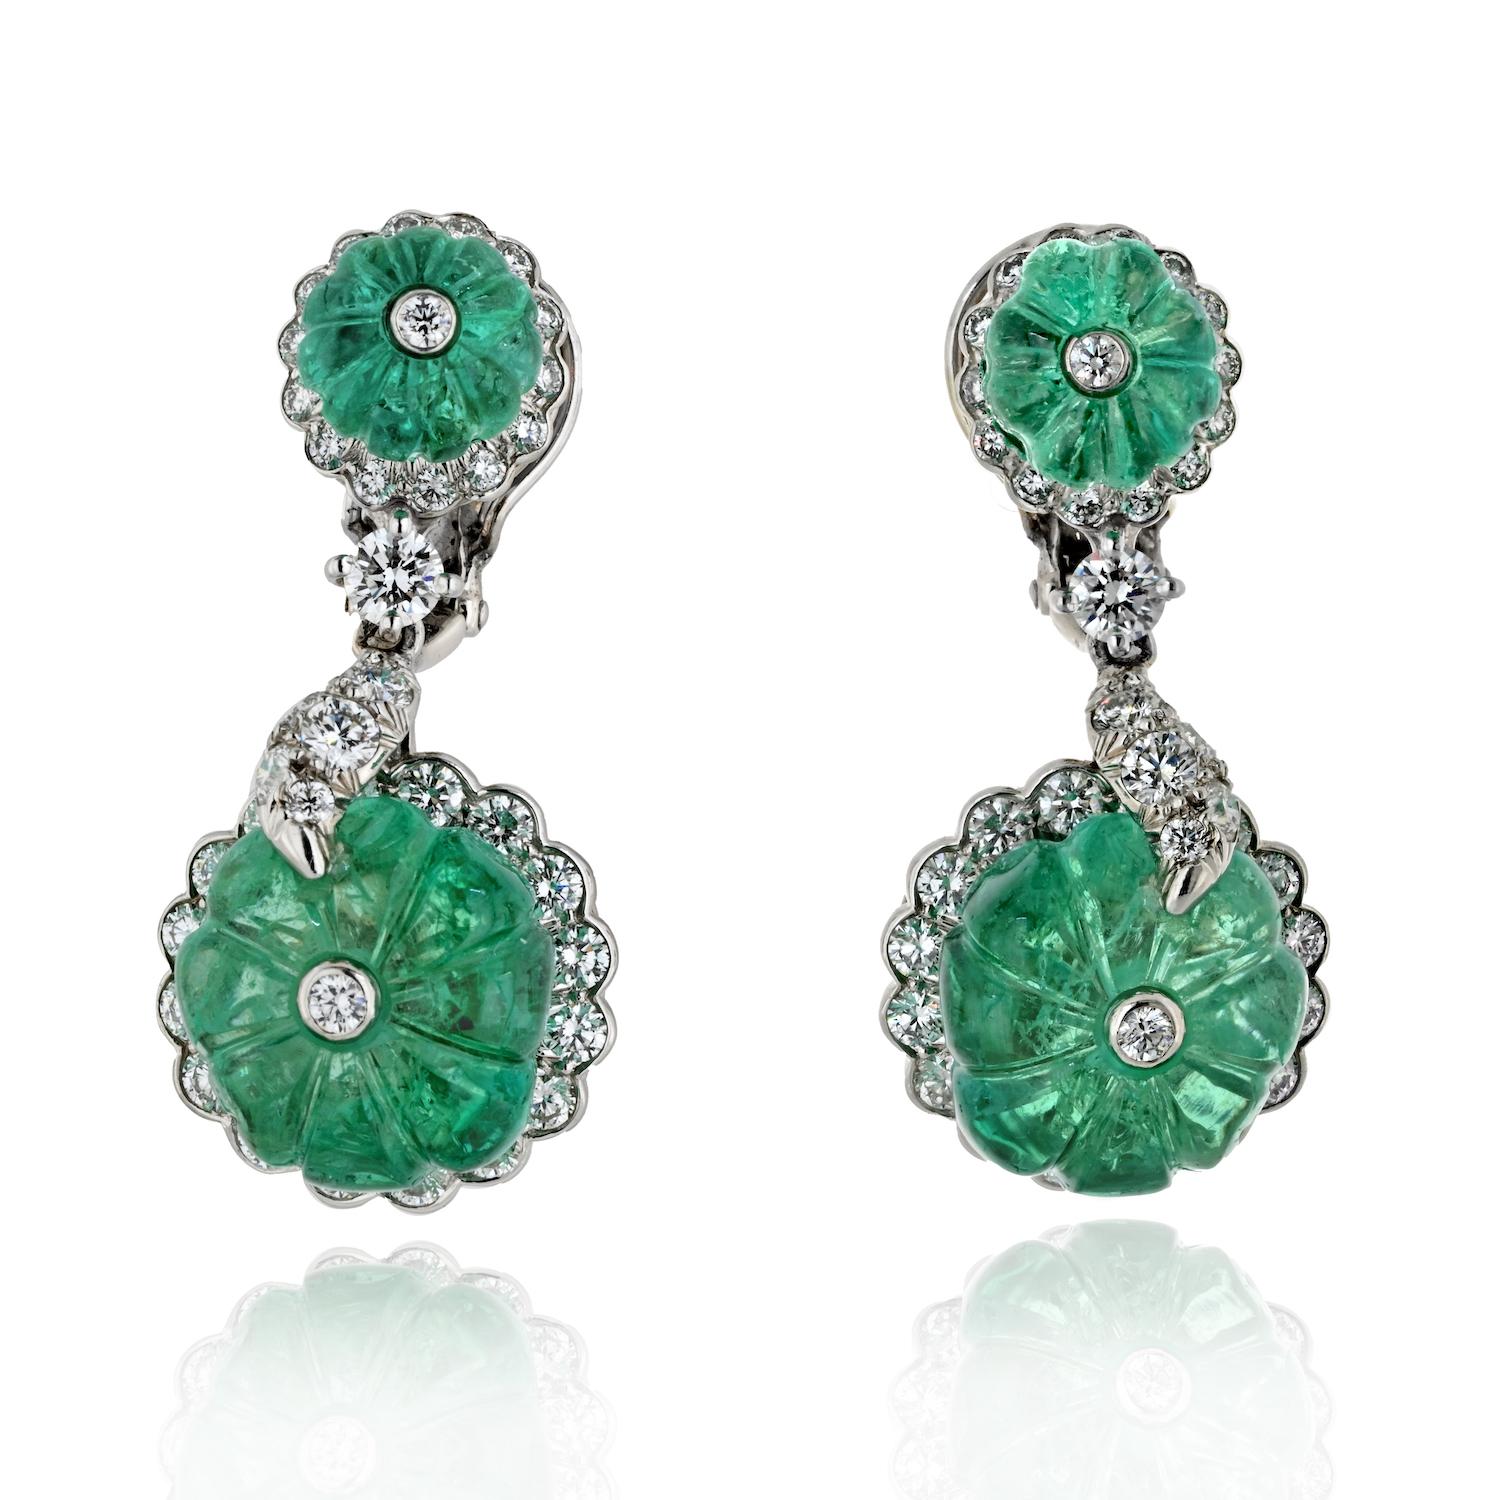 Indulge in the luxurious allure of the David Webb Platinum Carved Green Emerald and Diamond Drop Earrings, where the rich green hues of emeralds meet the brilliance of diamonds in an exquisite design.

**Key Features:**

1. **Material:**
   -